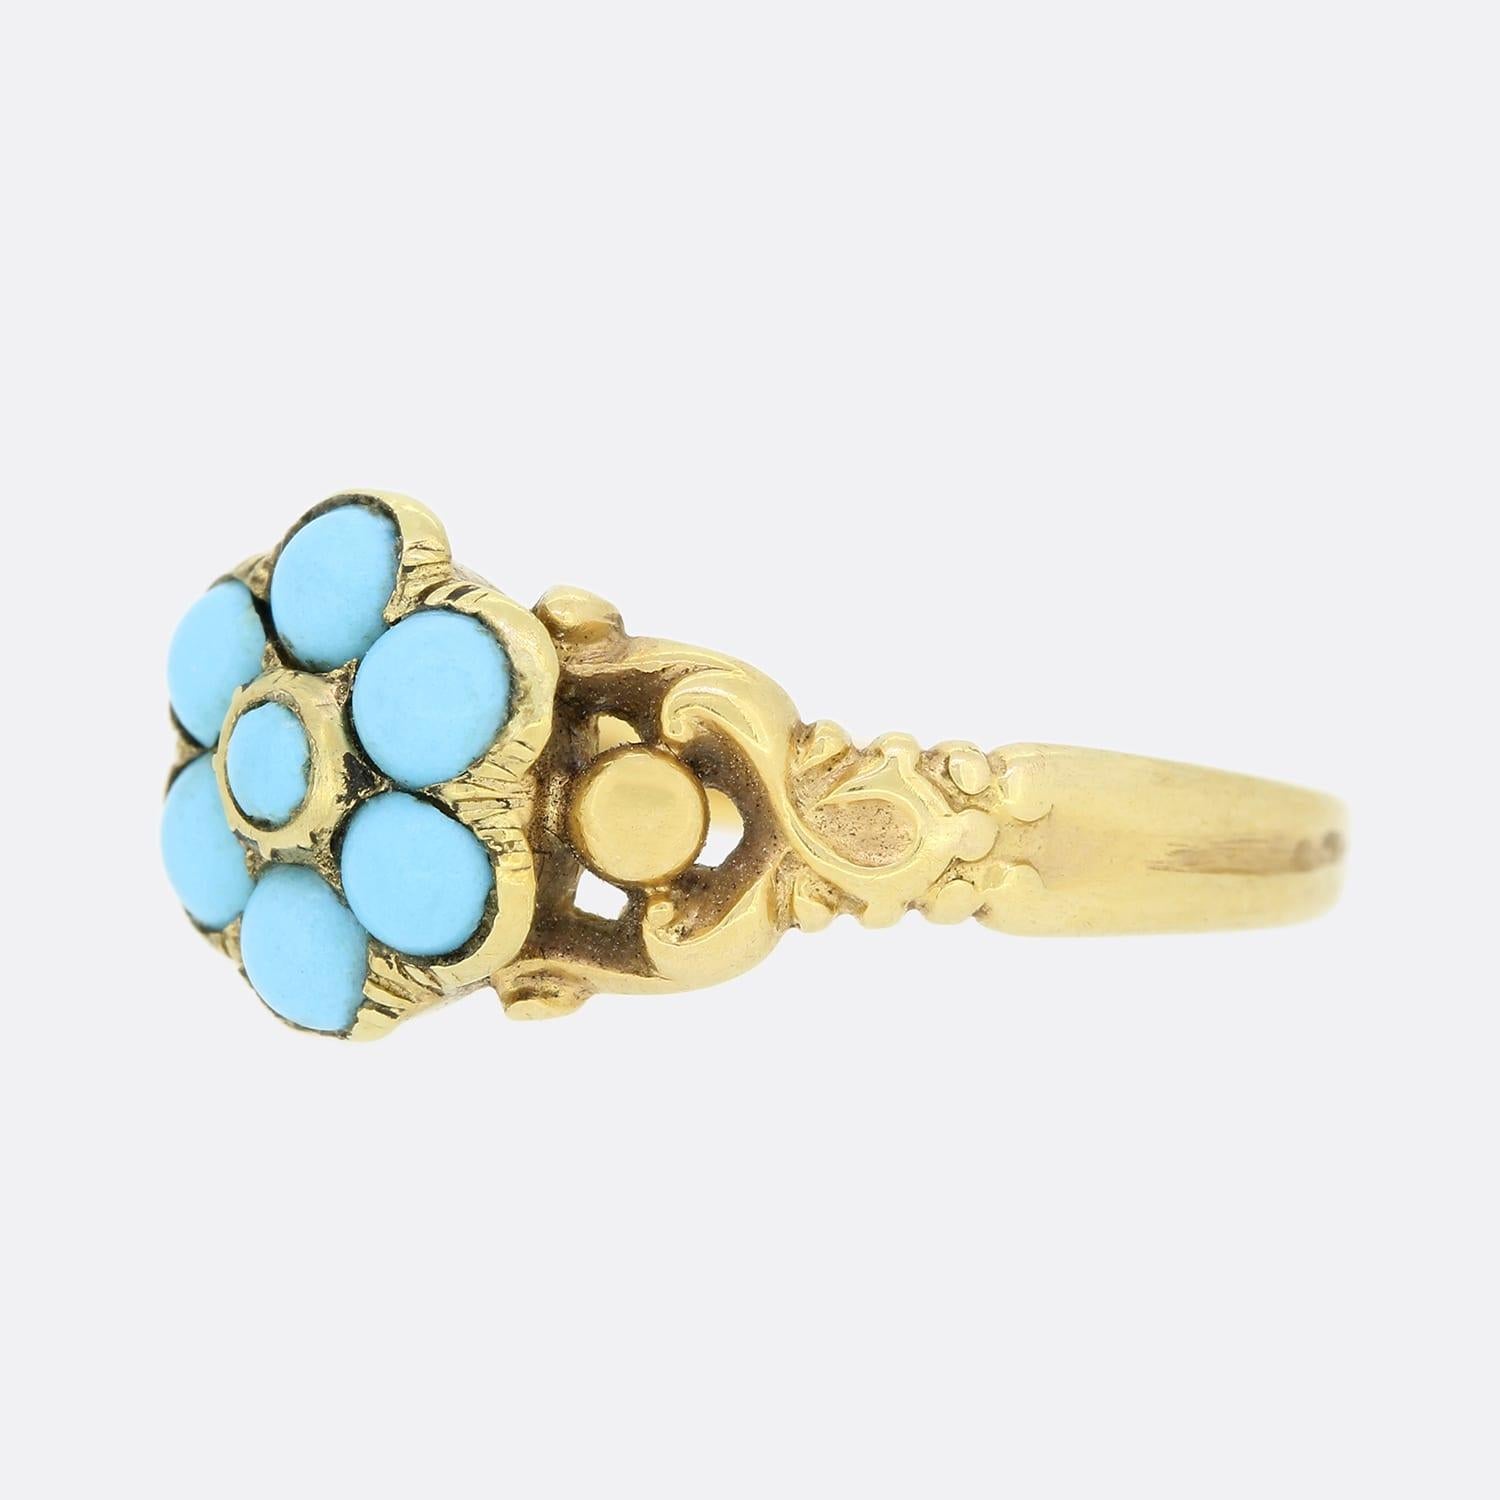 This is a wonderful 18ct yellow gold turquoise cluster ring. The ring features 7 well-matched turquoise stones that are set in between lovely patterned shoulders. The turquoise stones represent the petals of a Forget-Me-Not flower.

Condition: Used